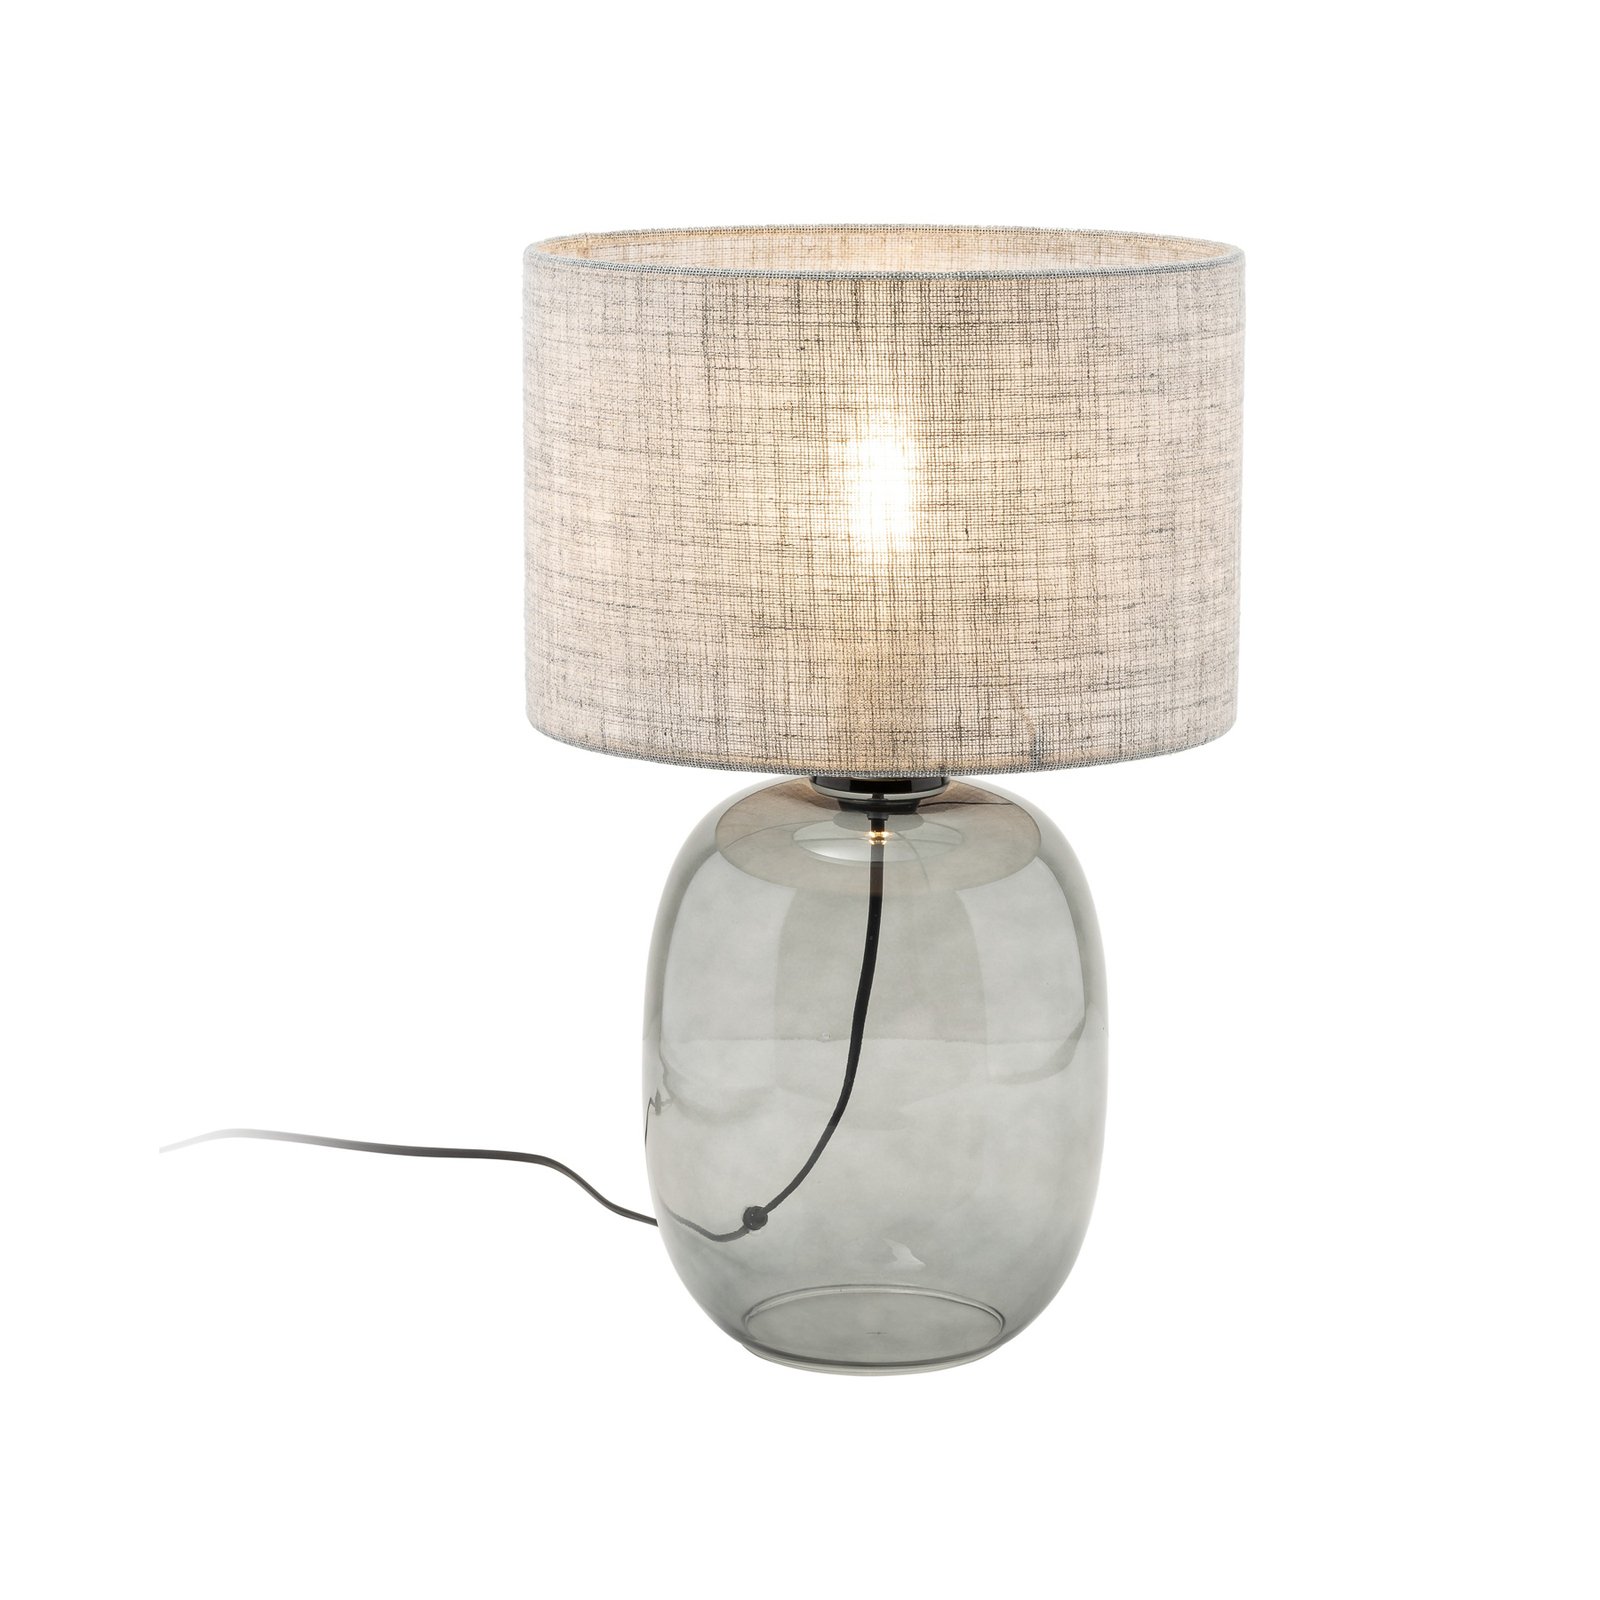 Melody table lamp, height 48 cm, smoky grey glass, grey fabric